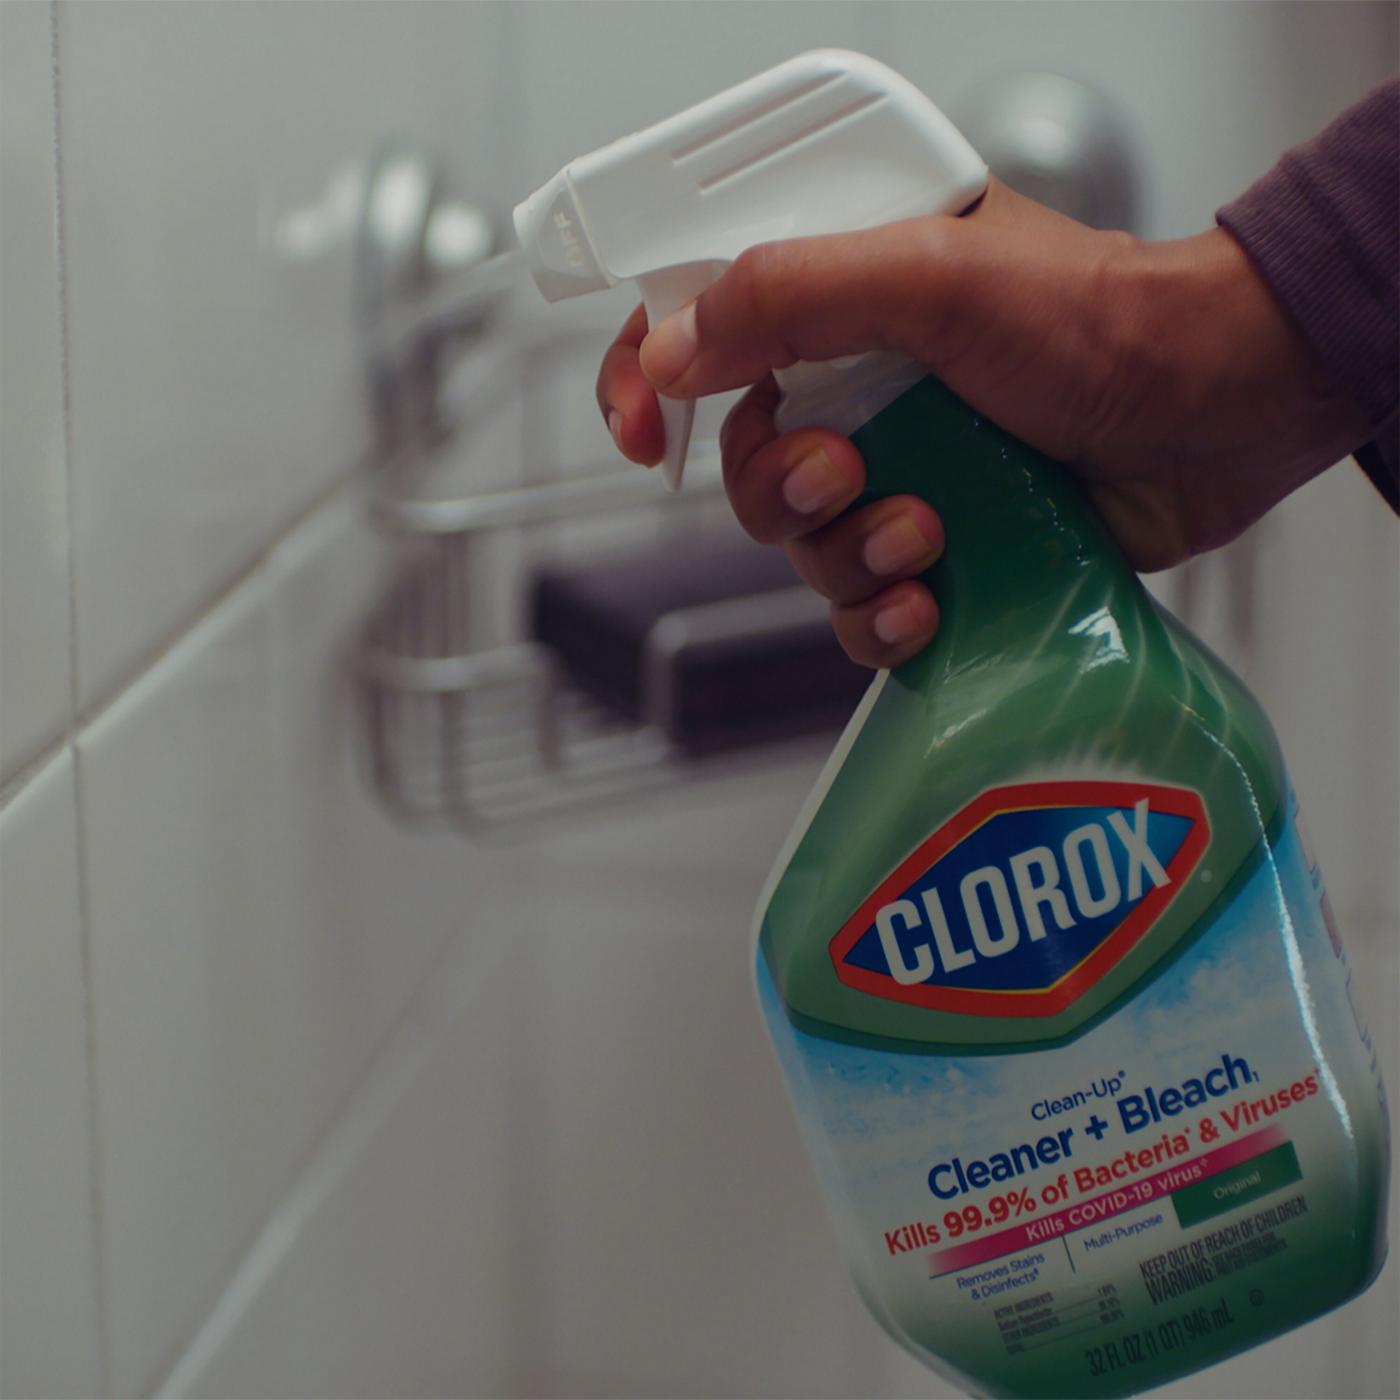 Clorox Clean-Up Cleaner & Bleach; image 3 of 13